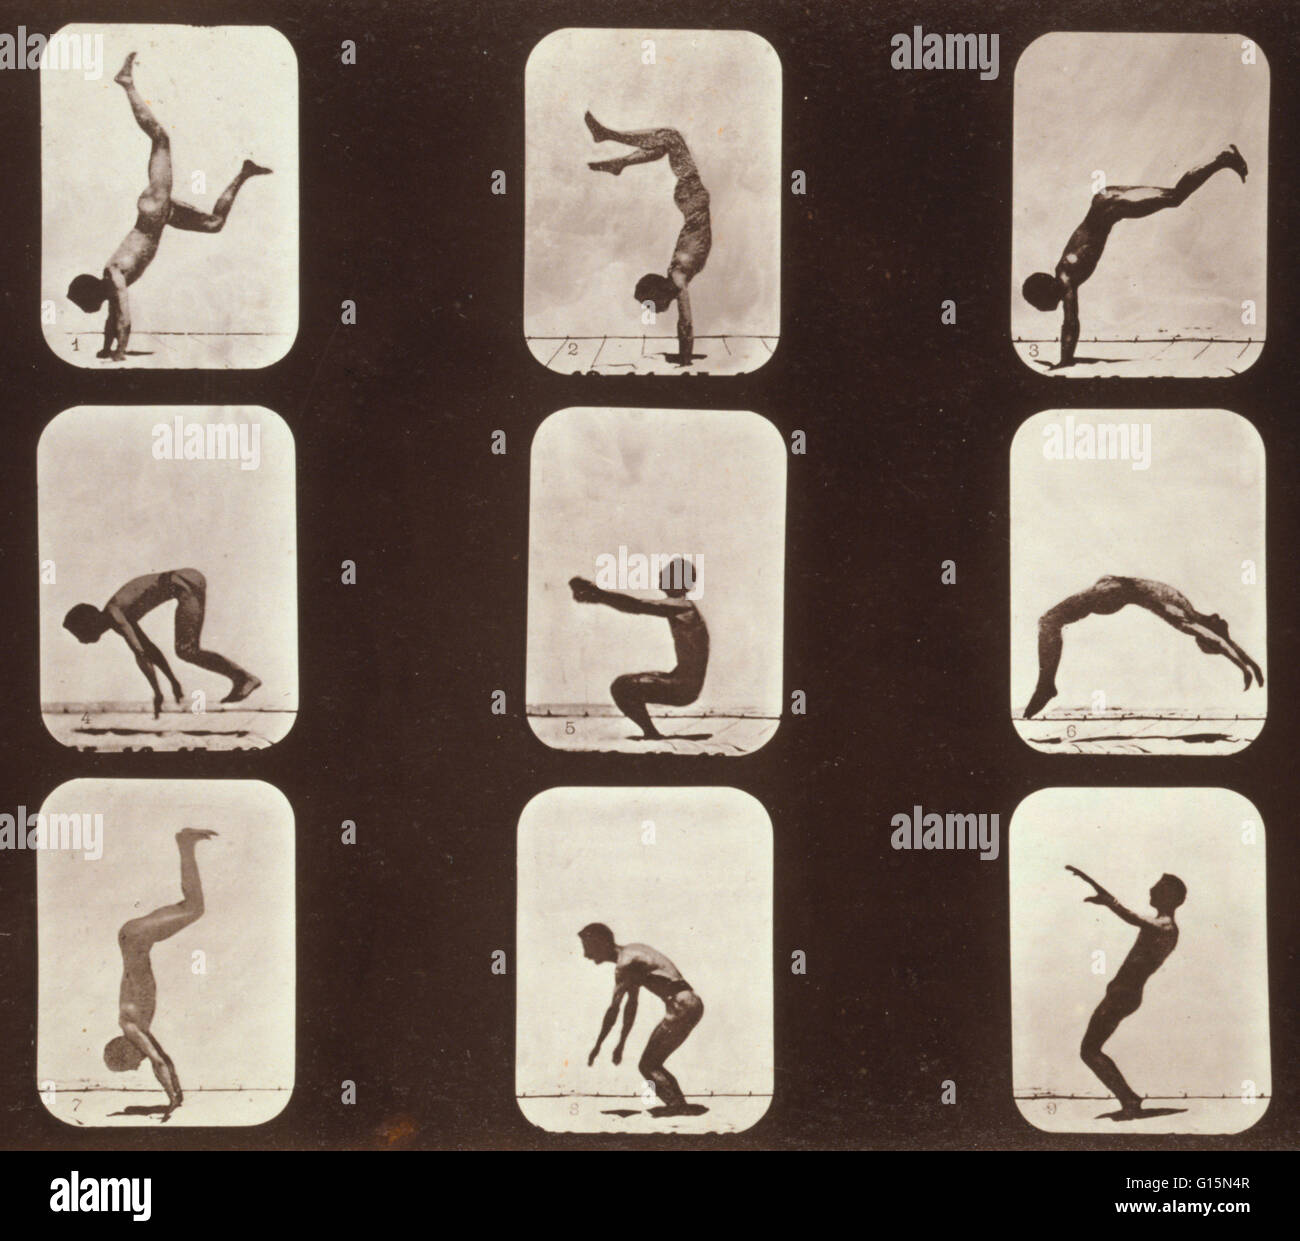 Muybridge Human Locomotion, Back Hand Spring, 1881. Photograph shows 9 consecutive images of a man doing a flip flap or a back hand spring. Eadweard James Muybridge (April 9, 1830 - May 8, 1904) was an English photographer important for his pioneering wor Stock Photo